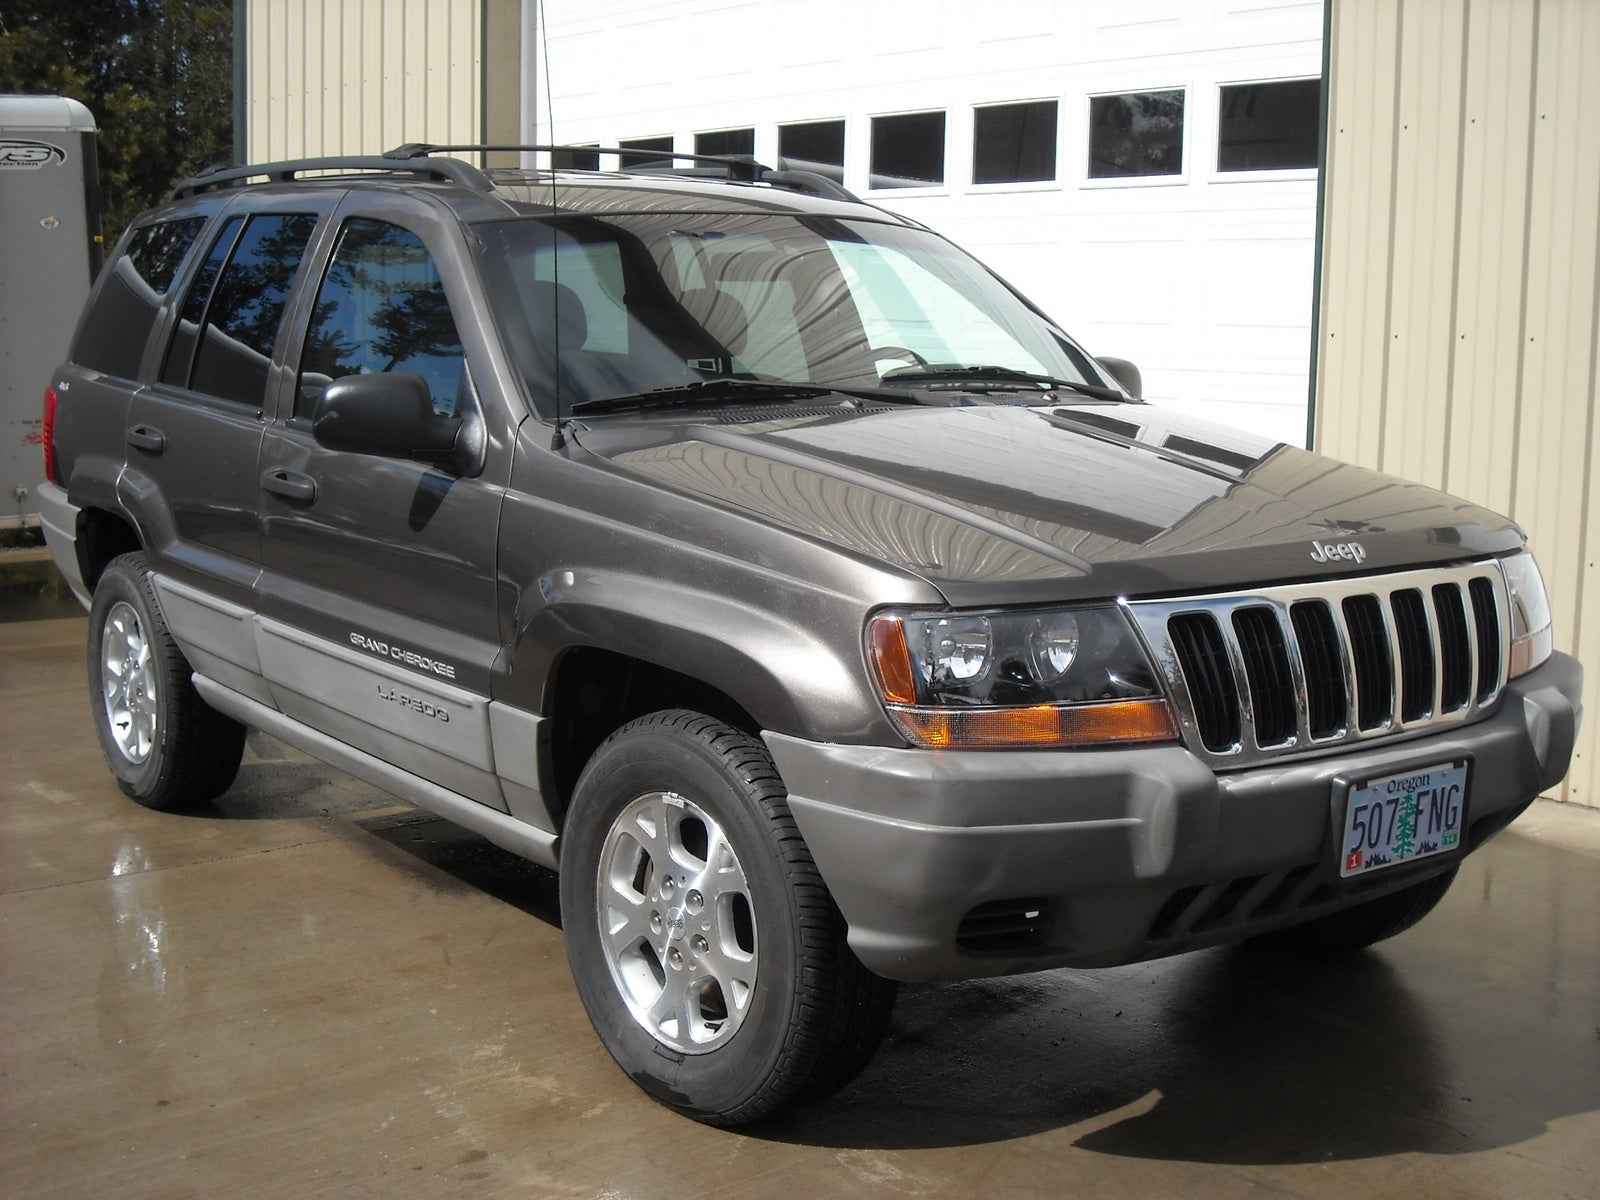 1999 Jeep Grand Cherokee Pictures CarGurus